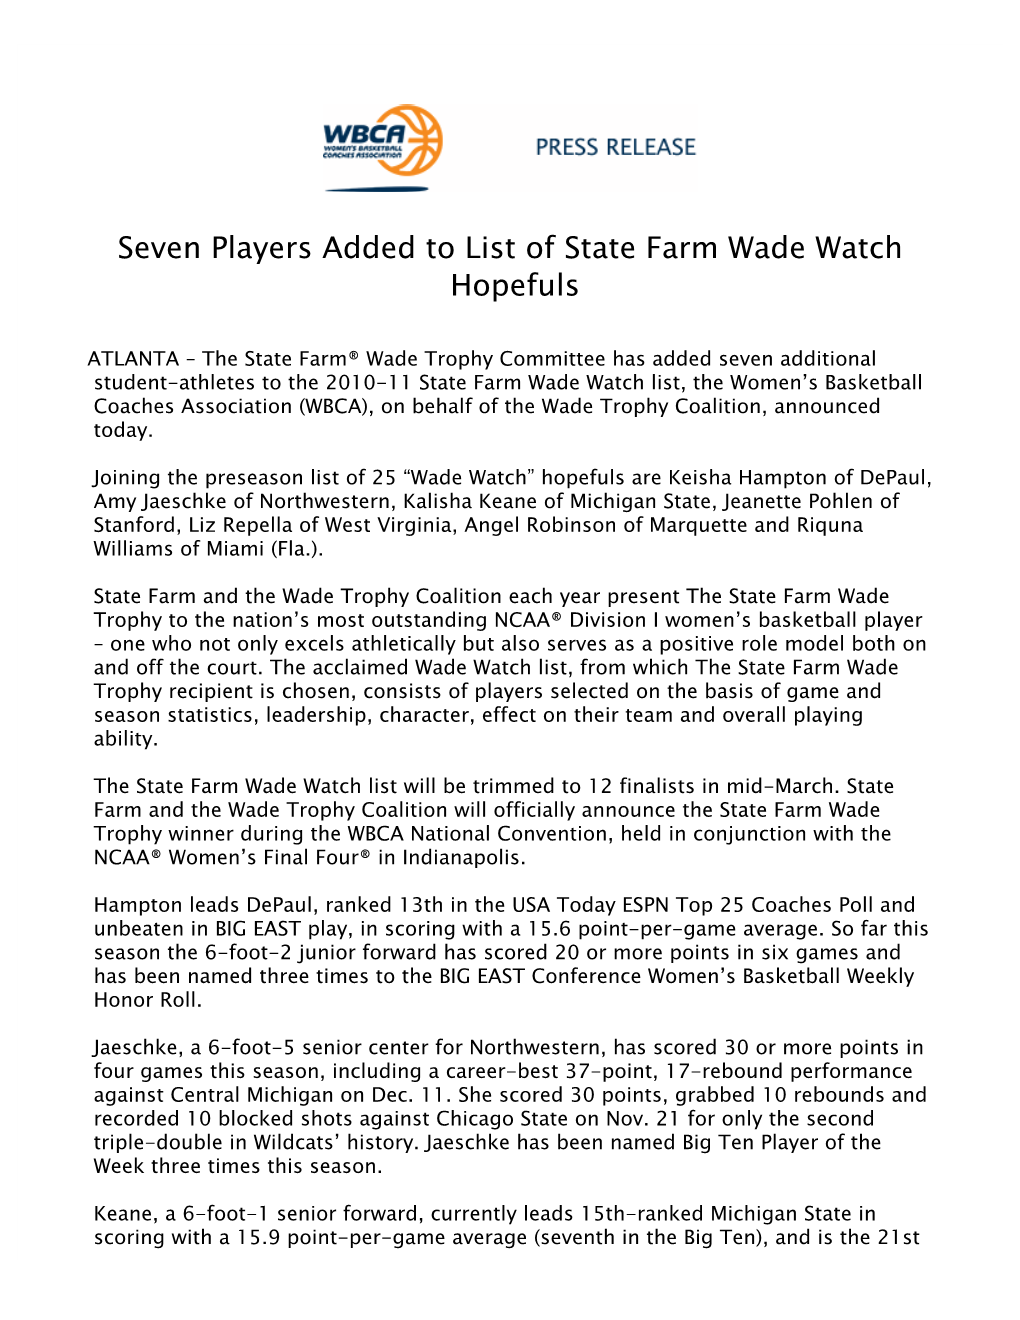 Seven Players Added to List of State Farm Wade Watch Hopefuls 2010